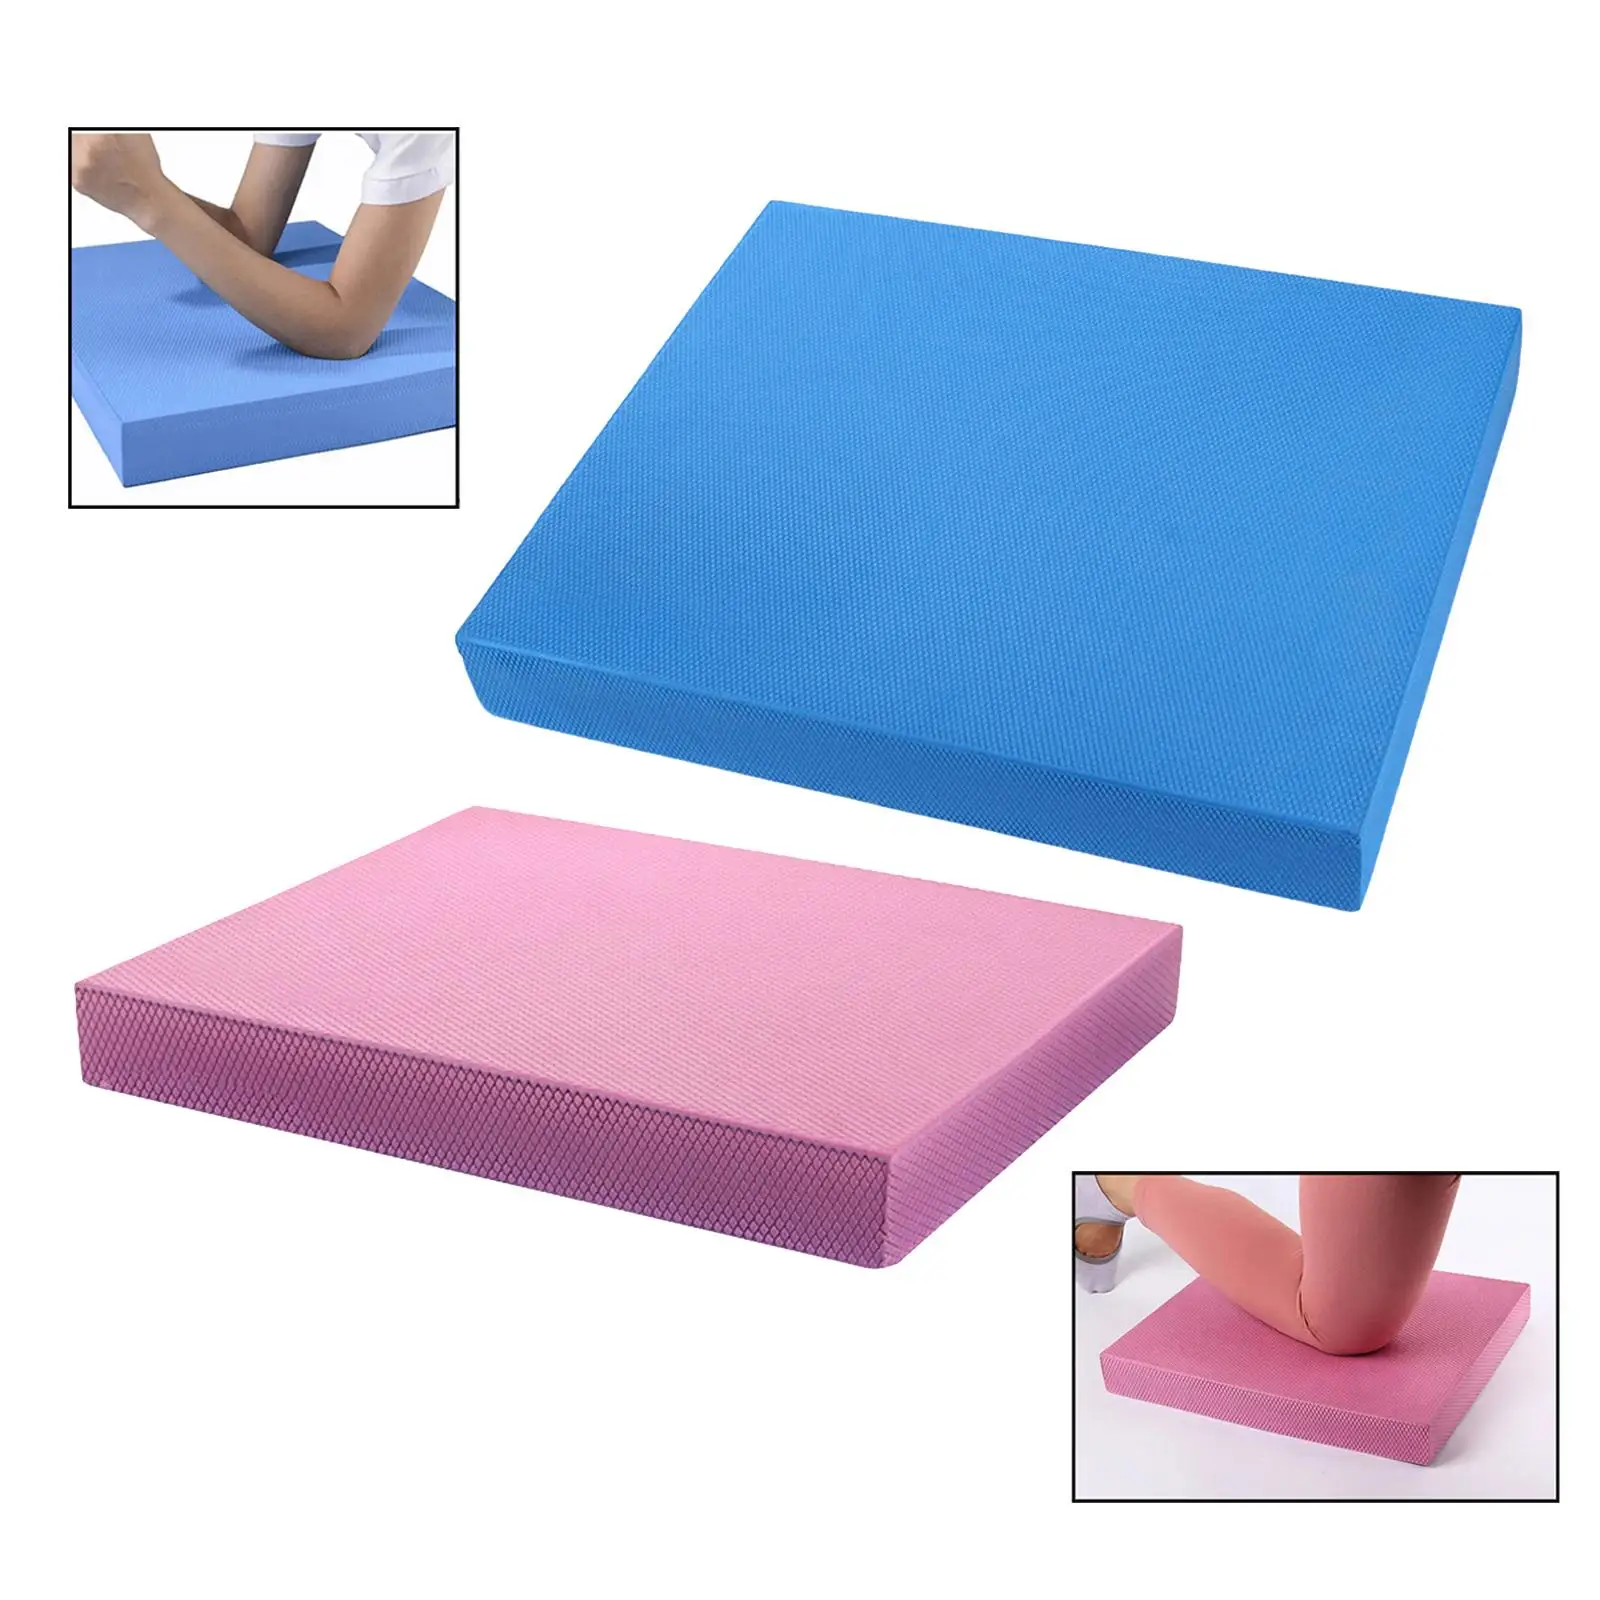 Soft Balance Pad Cushion Yoga Mat Core Trainer Physical Therapy Exercise Gym